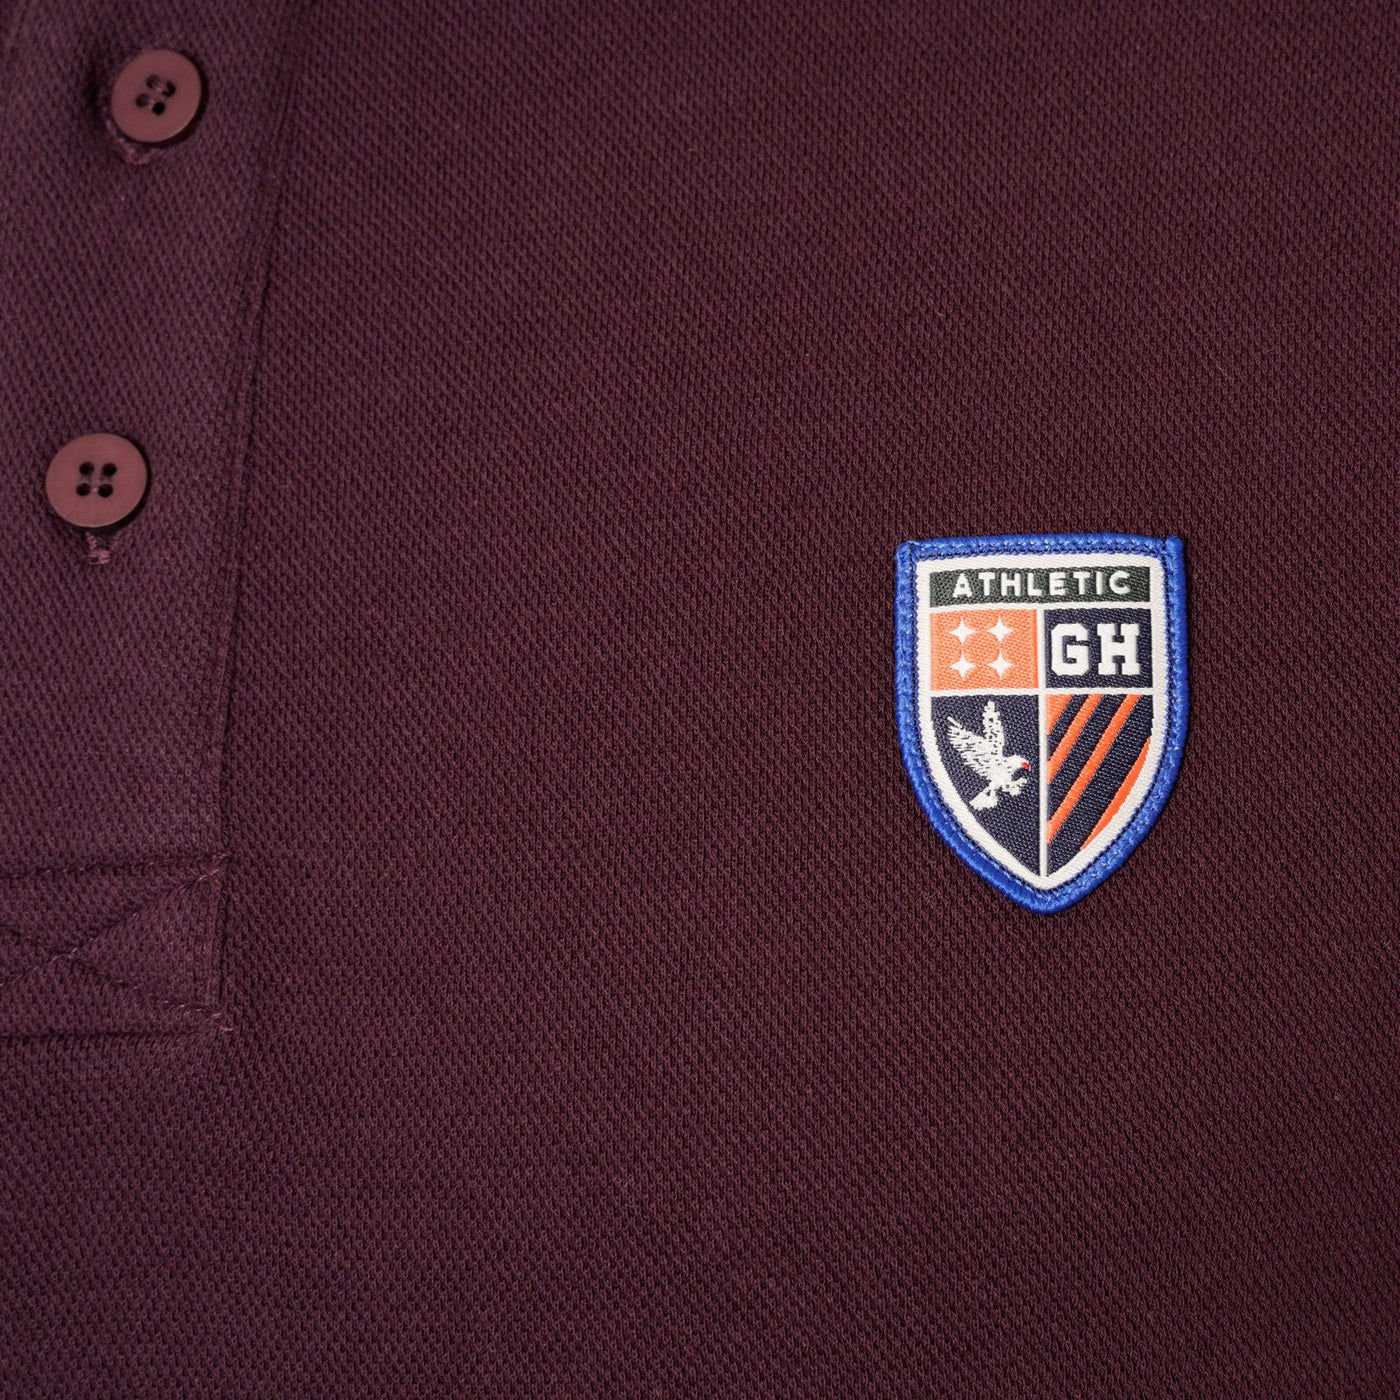 Extra-Tall Grey Hawk Shield Badge Pique Polo Shirt in Wine RRP £49.50